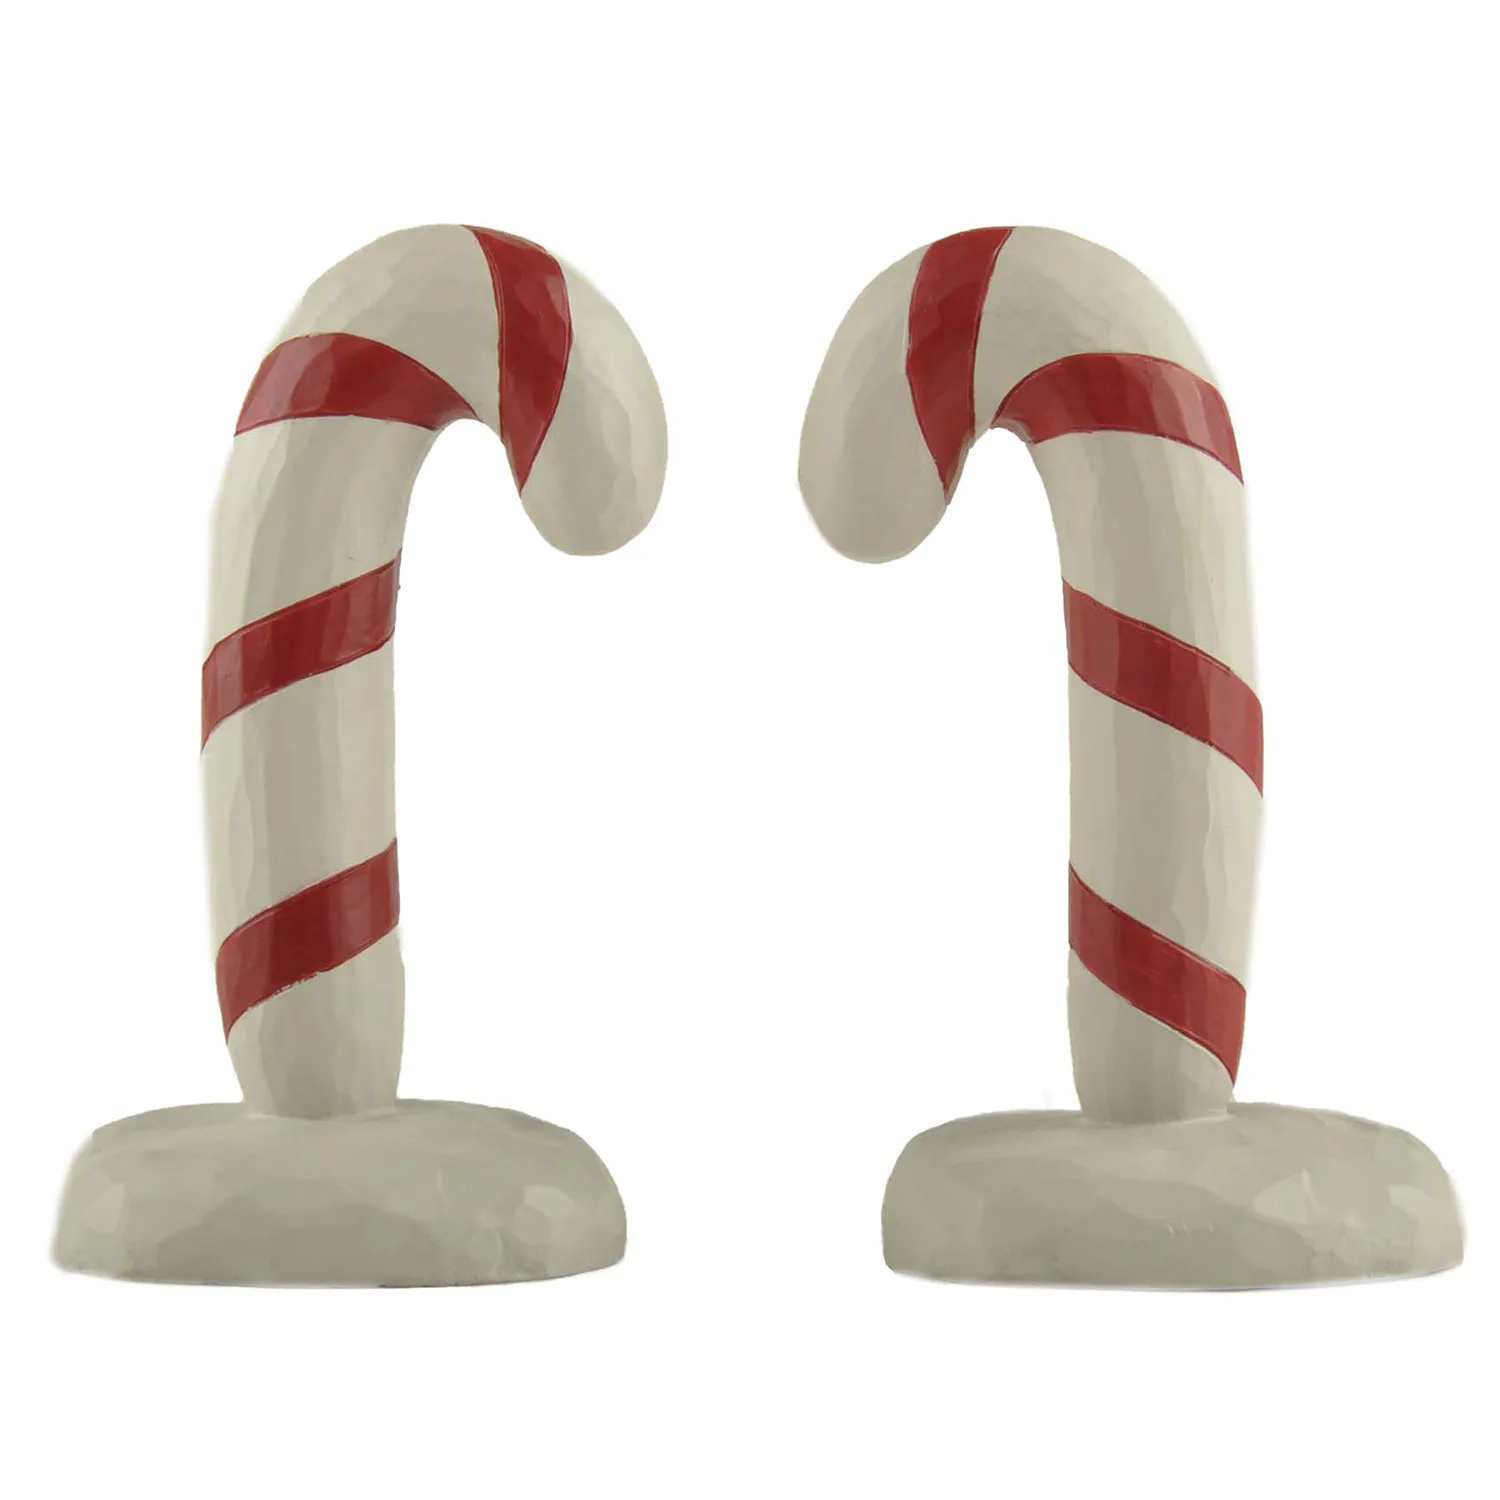 Exquisite Handemade Resin Christmas Crafts S/2 White and Red Candy Cane for Home Decor 238-13747